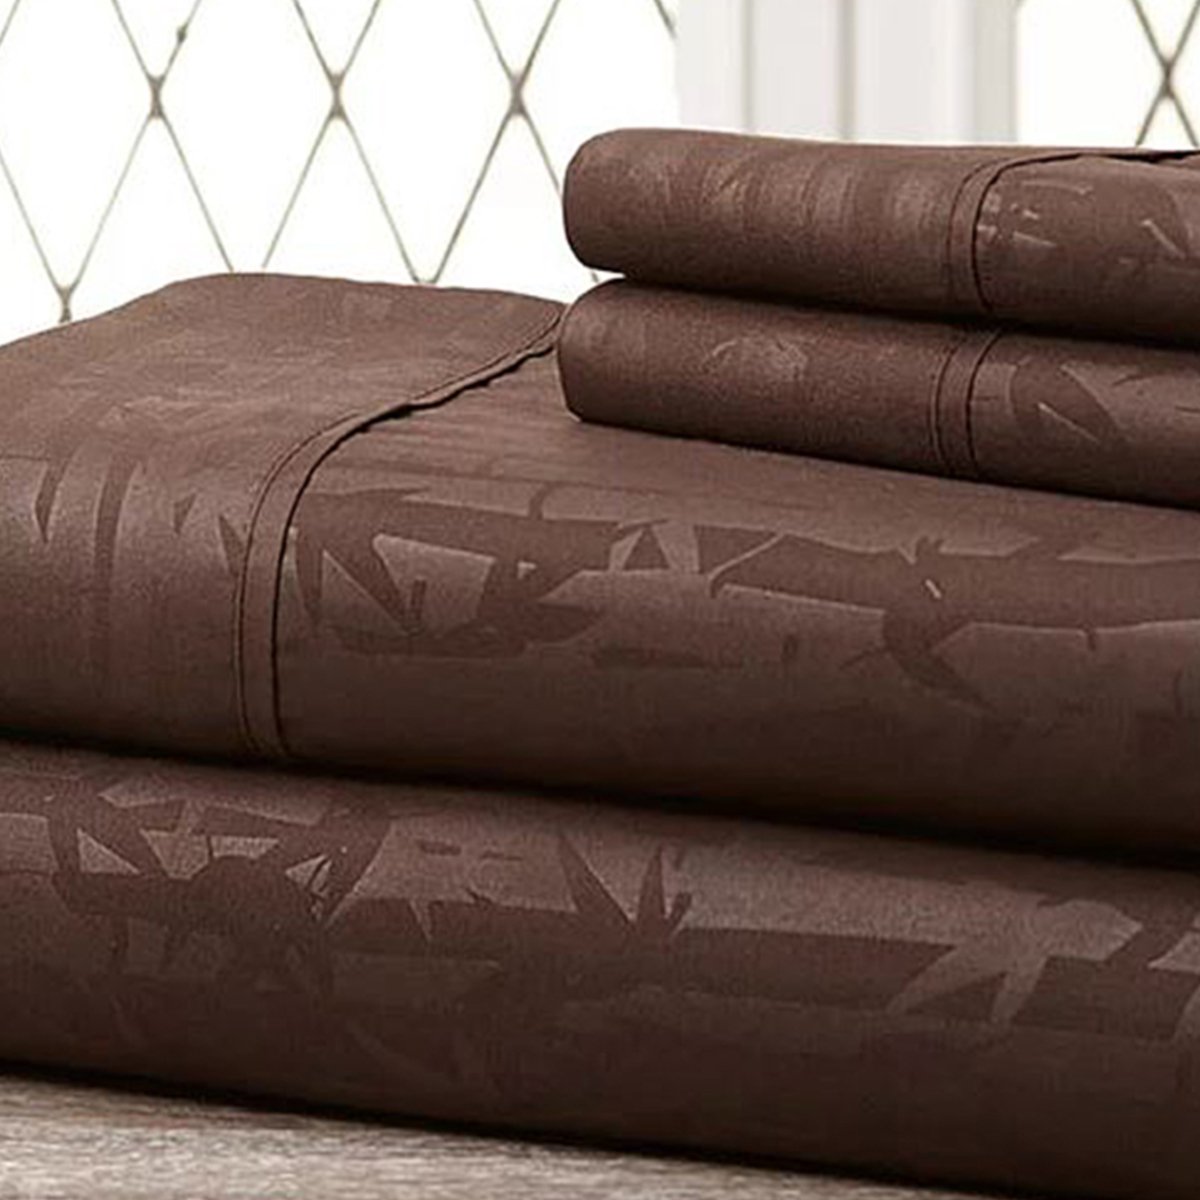 Hny-4pc-eb-cho-q Super-soft 1600 Series Bamboo Embossed Bed Sheet, Chocolate - Queen, 4 Piece